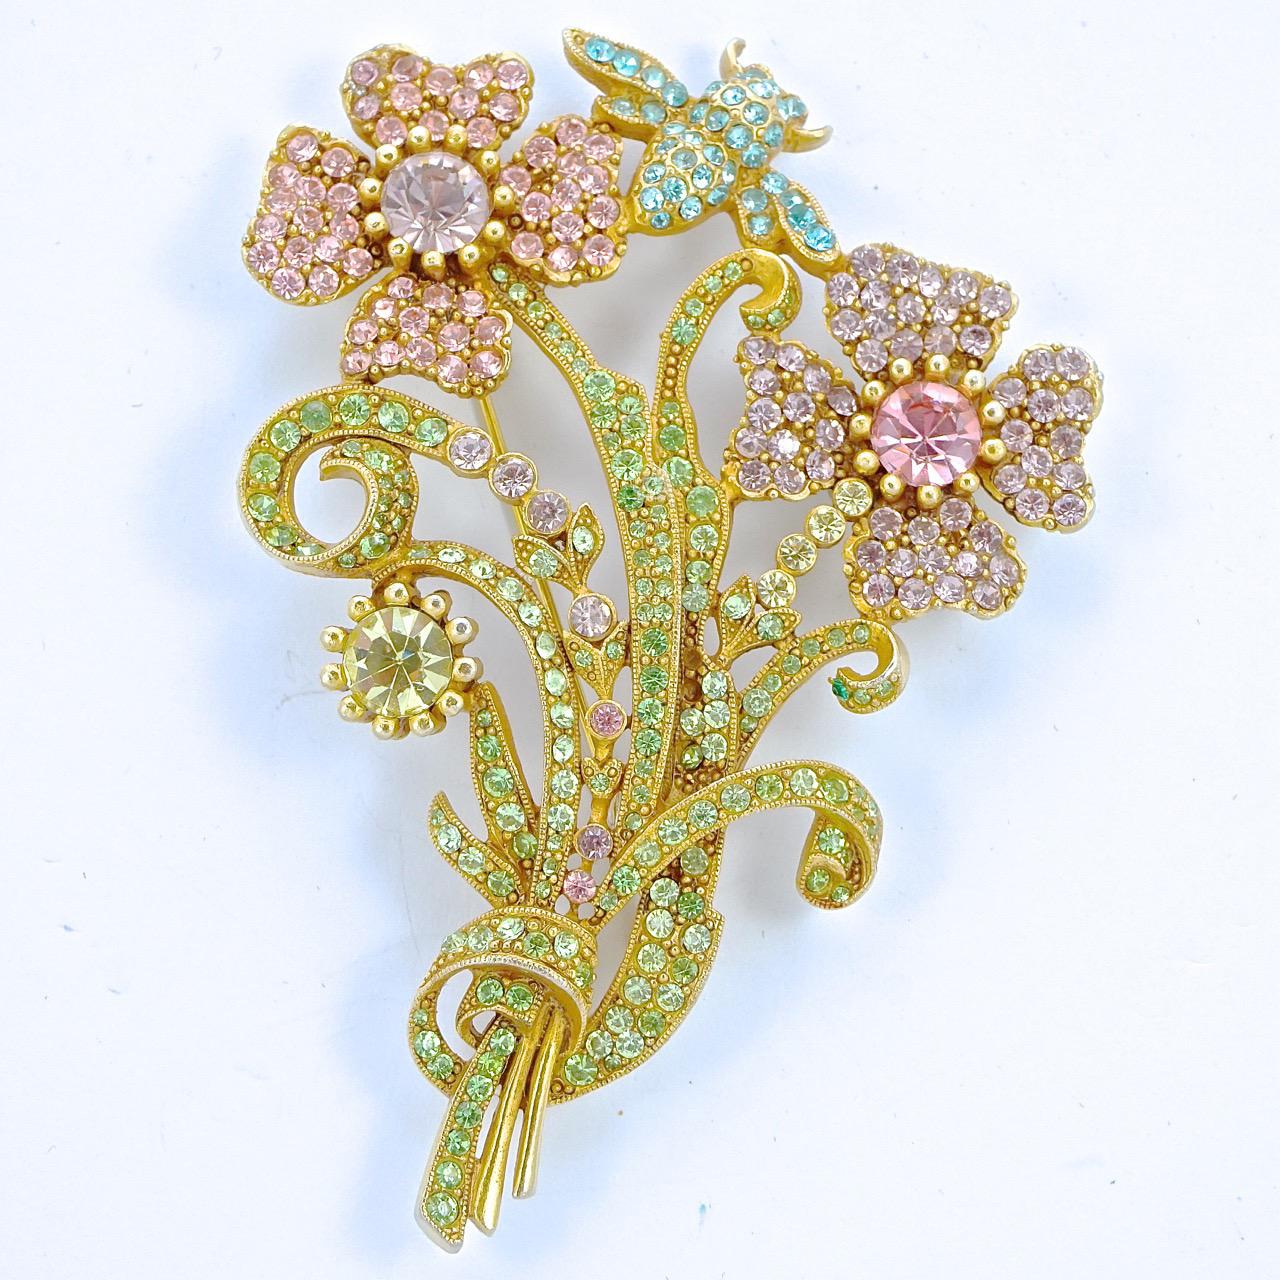 Fabulous vintage Butler & Wilson gold tone flower and bee brooch, and matching flower earrings. The brooch is set with sparkling crystals - lime green leaves, pale pink and pale lilac flowers, and aqua blue crystals for the bee. The brooch measures